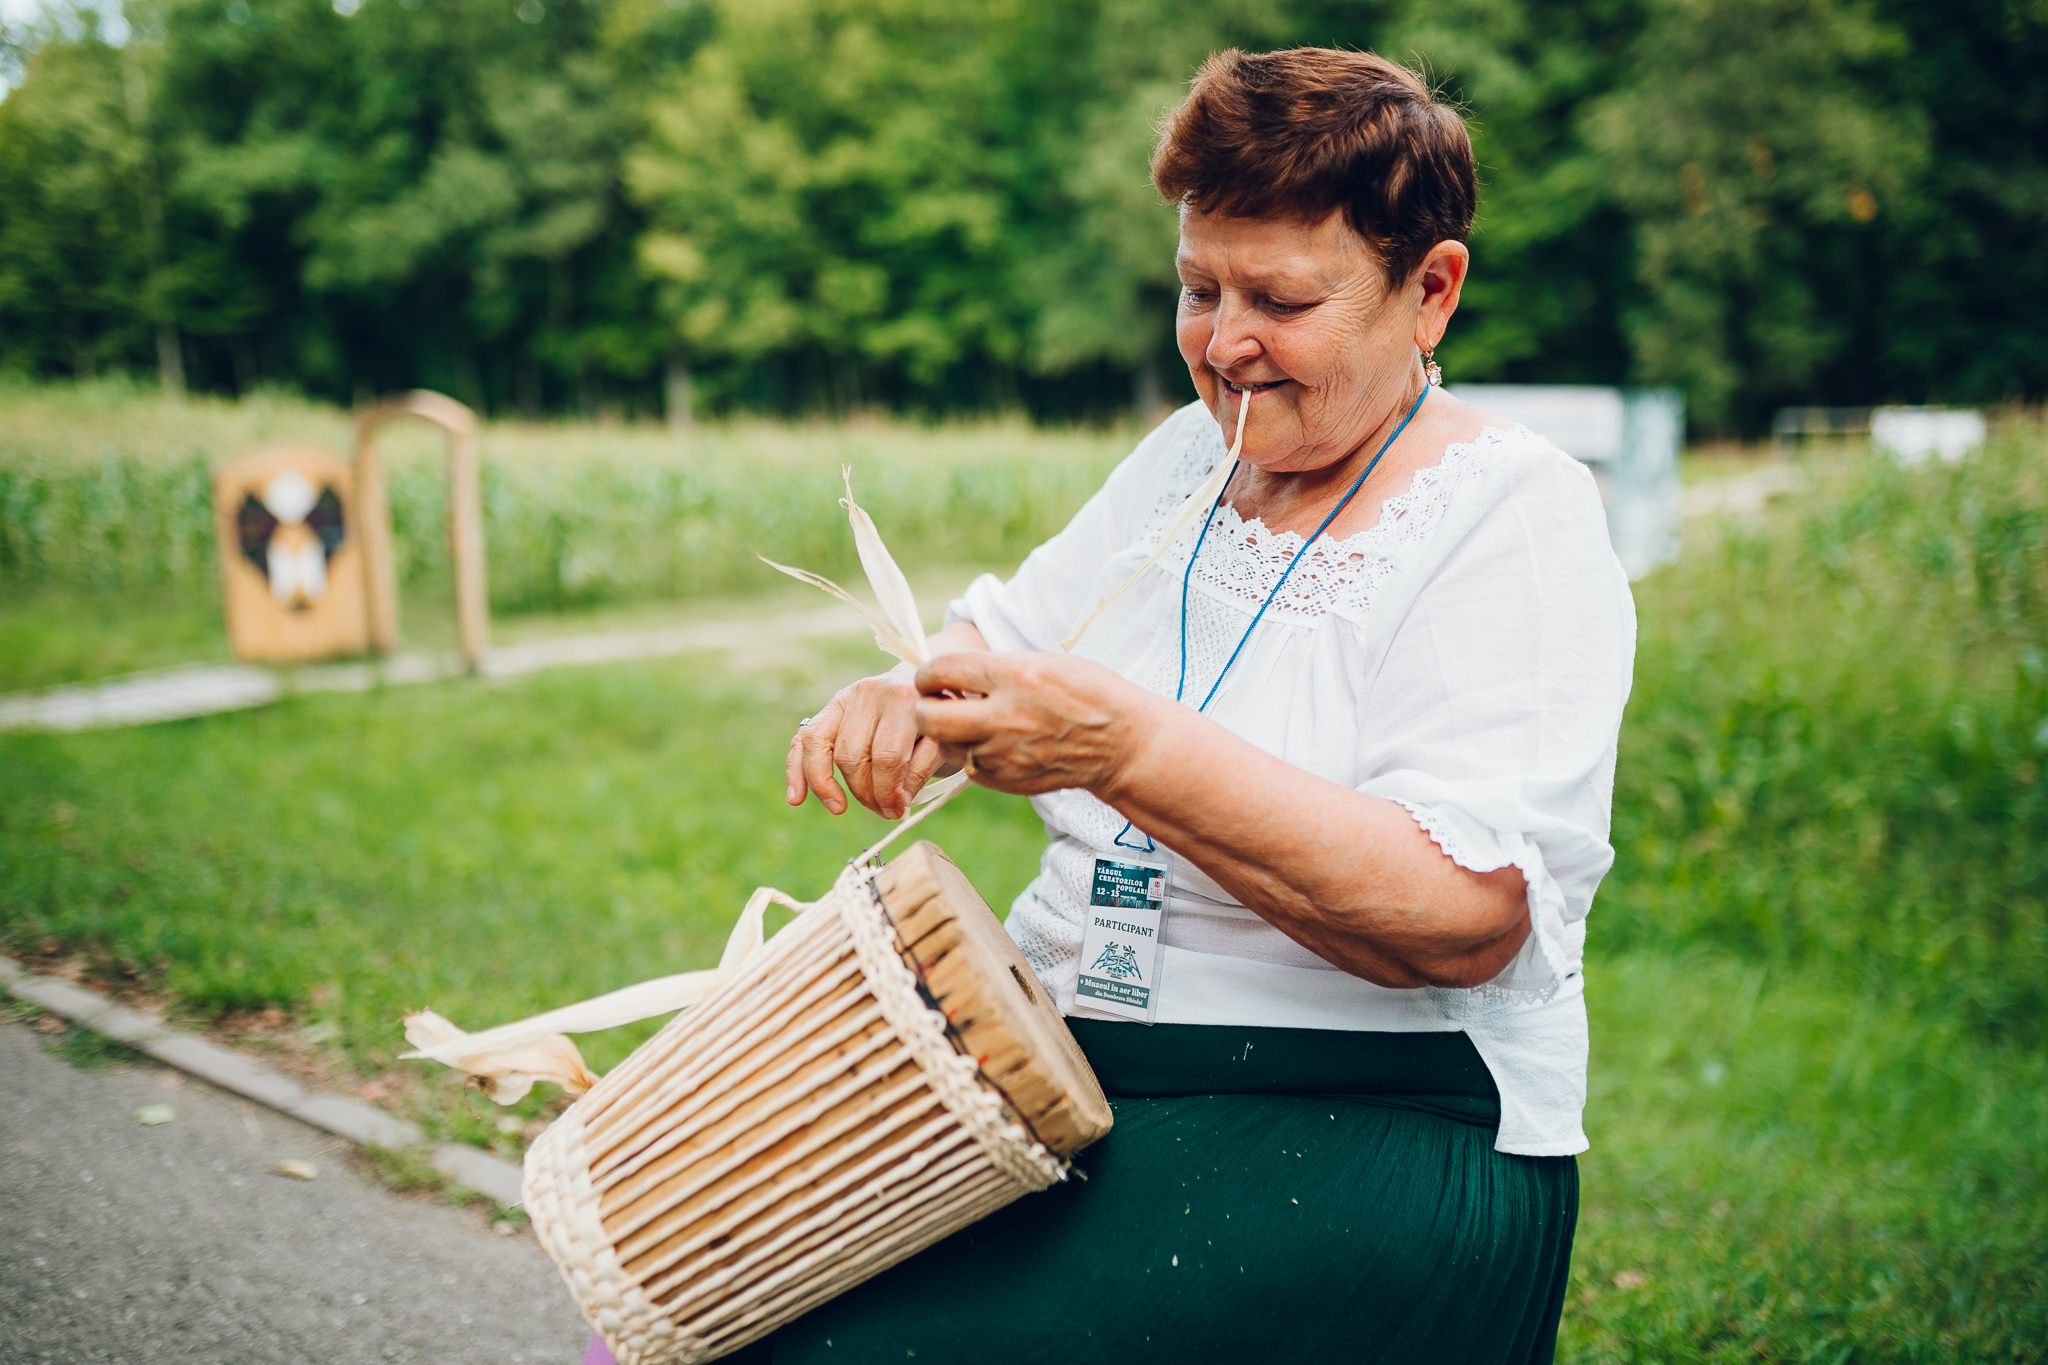 The Fair of Traditional Craftspeople from Romania (40th edition)